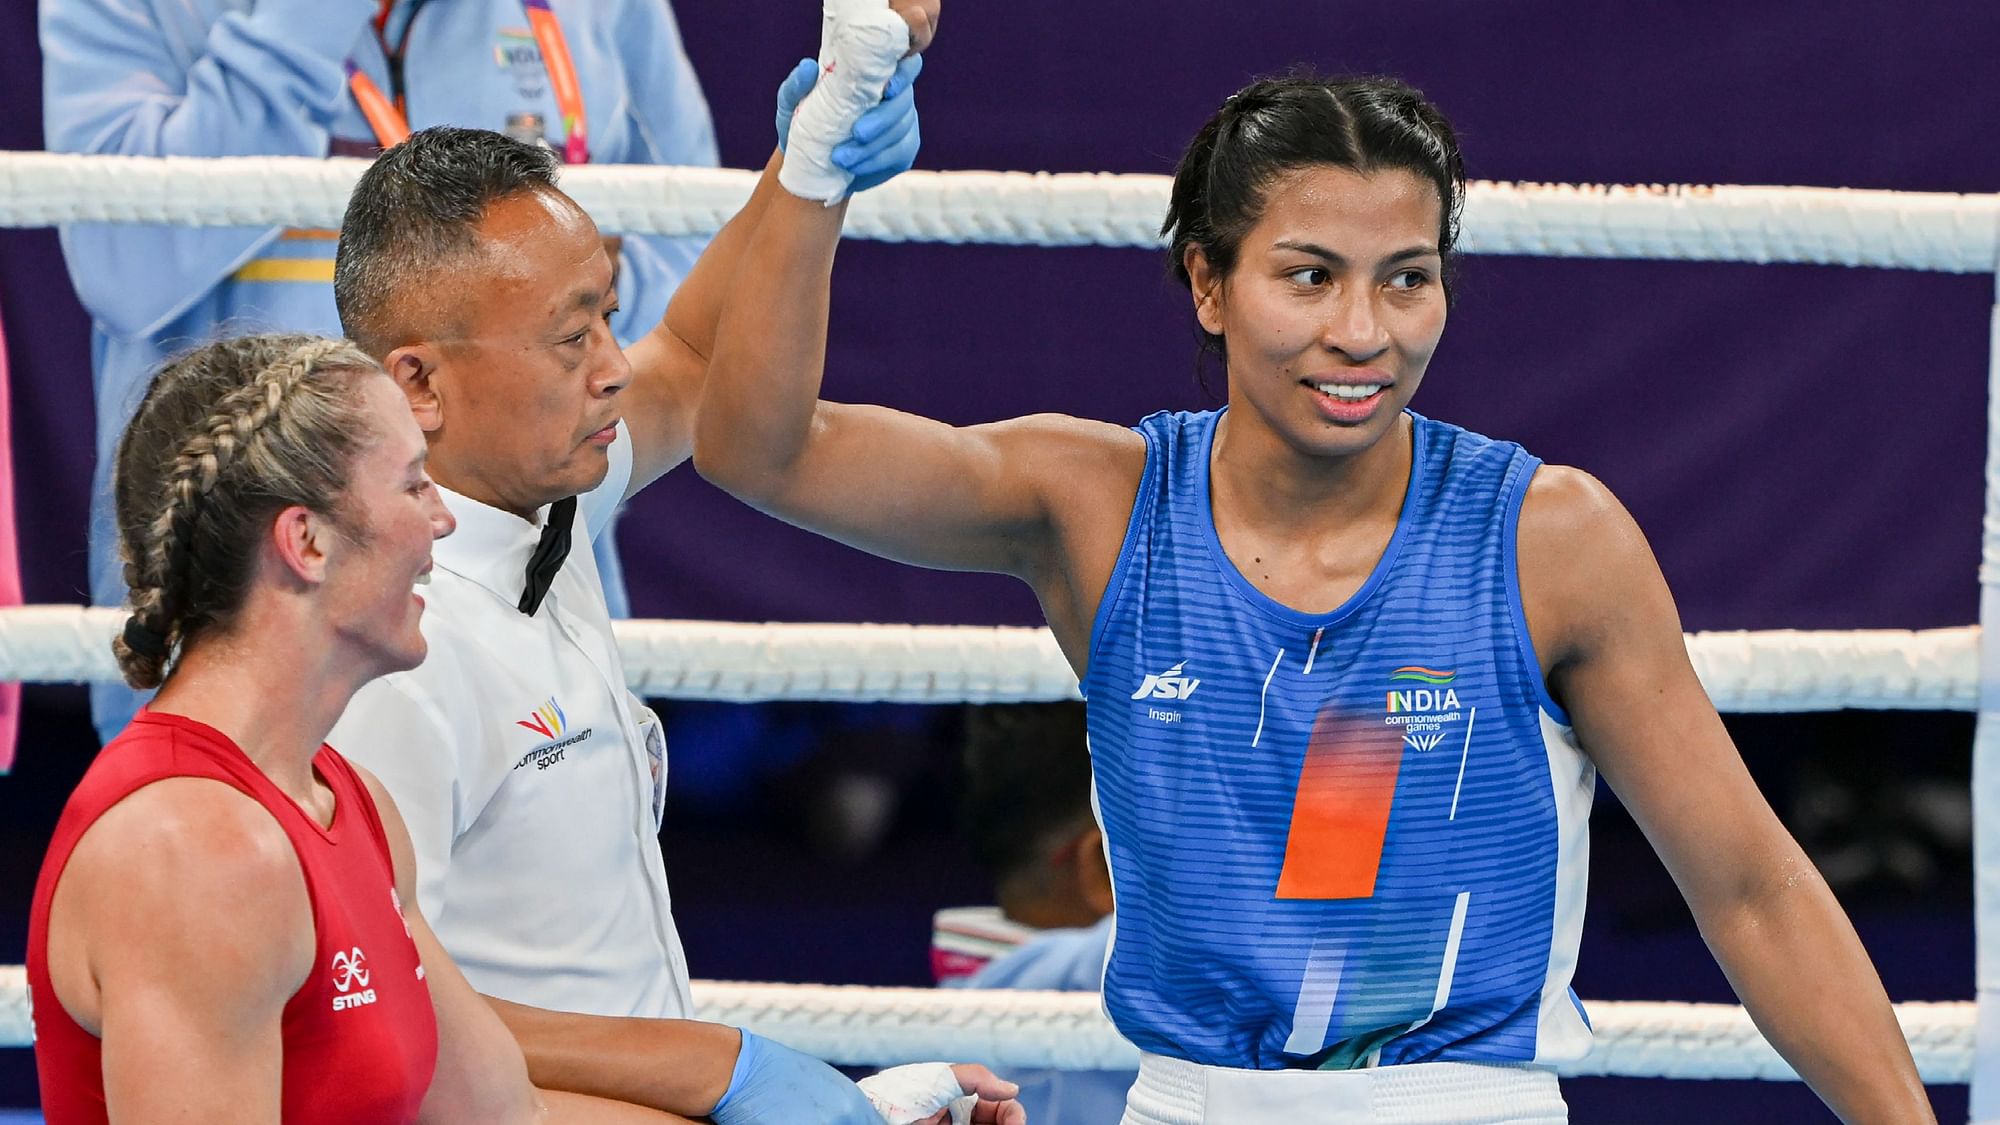 <div class="paragraphs"><p>India's Lovlina Borgohain during the women's 66-70kg (light middleweight) boxing match of the Commonwealth Games 2022.</p></div>